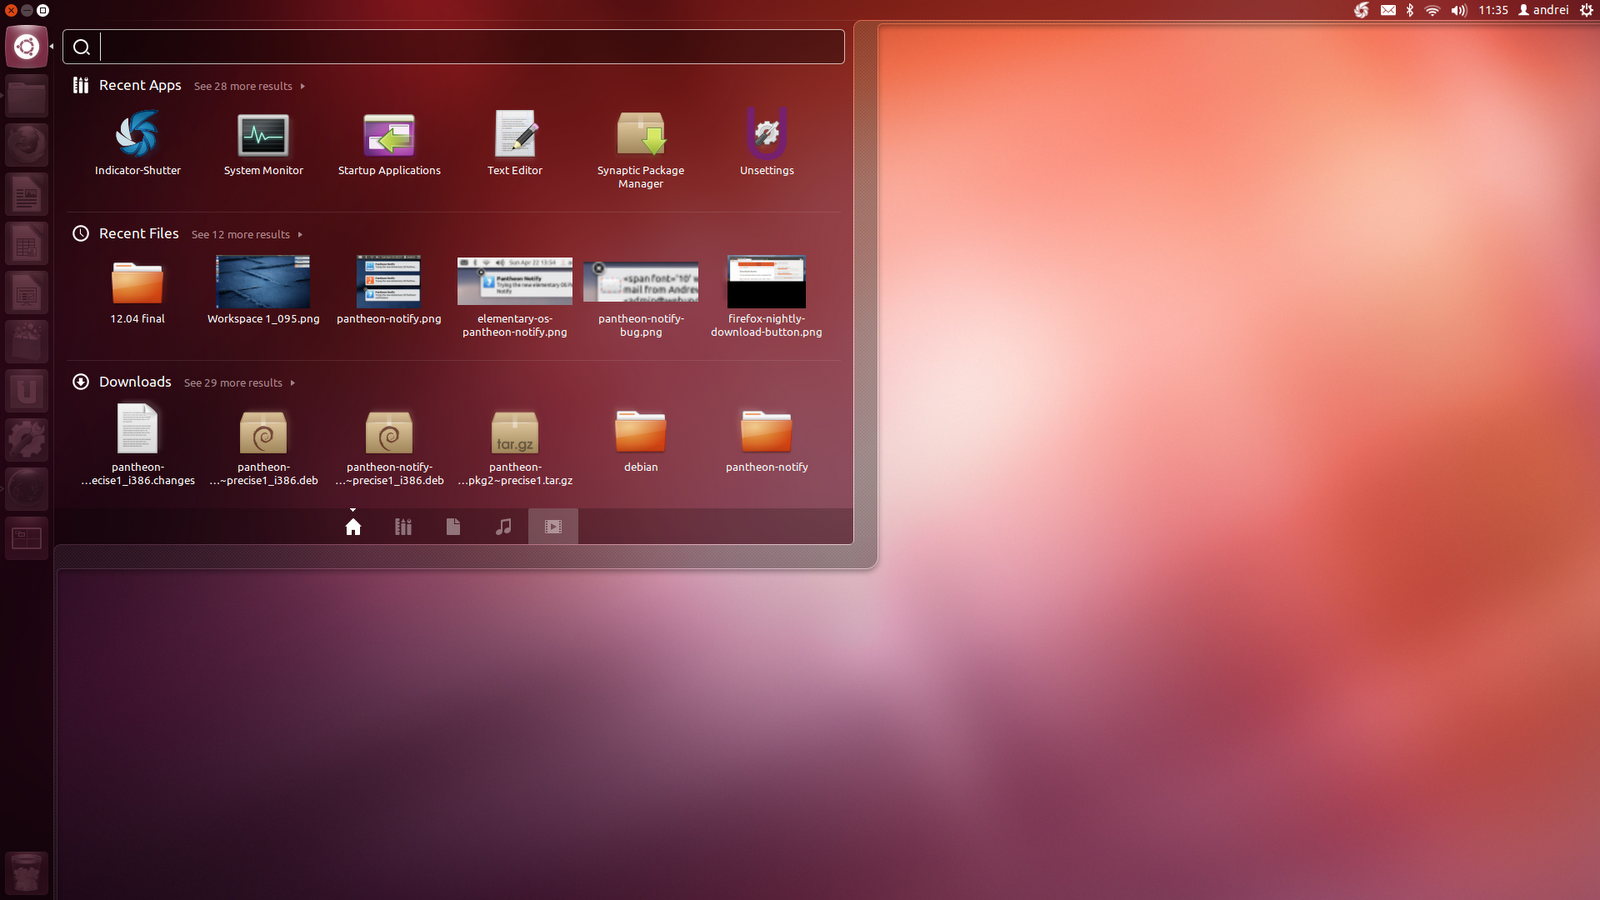 Ubuntu 12.04 LTS Precise Pangolin Released - Lets Download and Install it1600 x 900